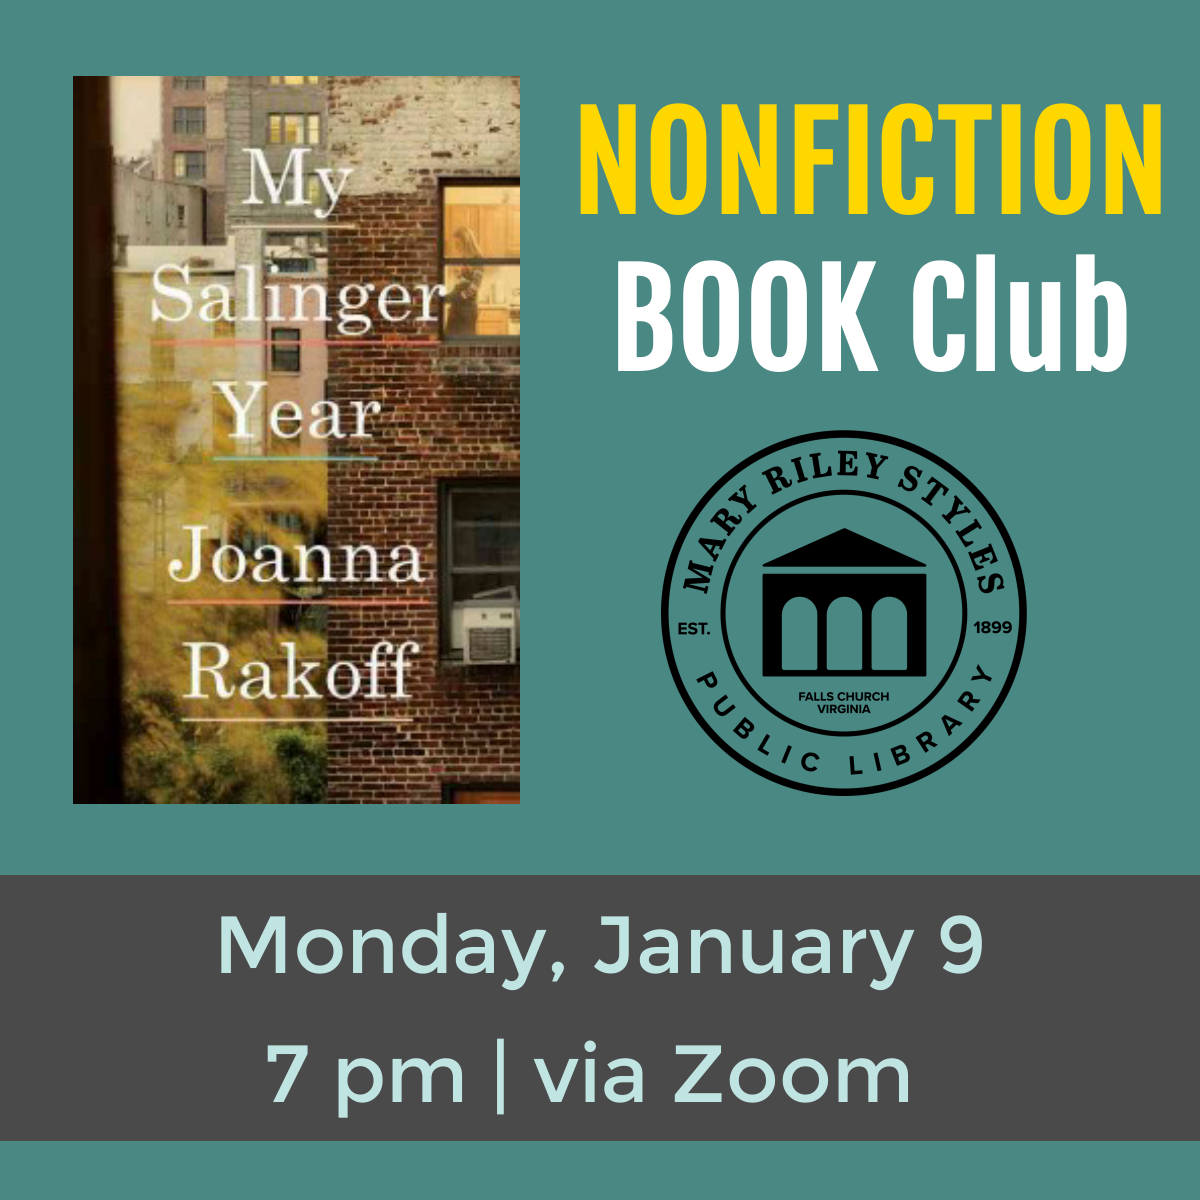 Nonfiction Book Club Monday January 9 at 7 pm via Zoom My Salinger Year